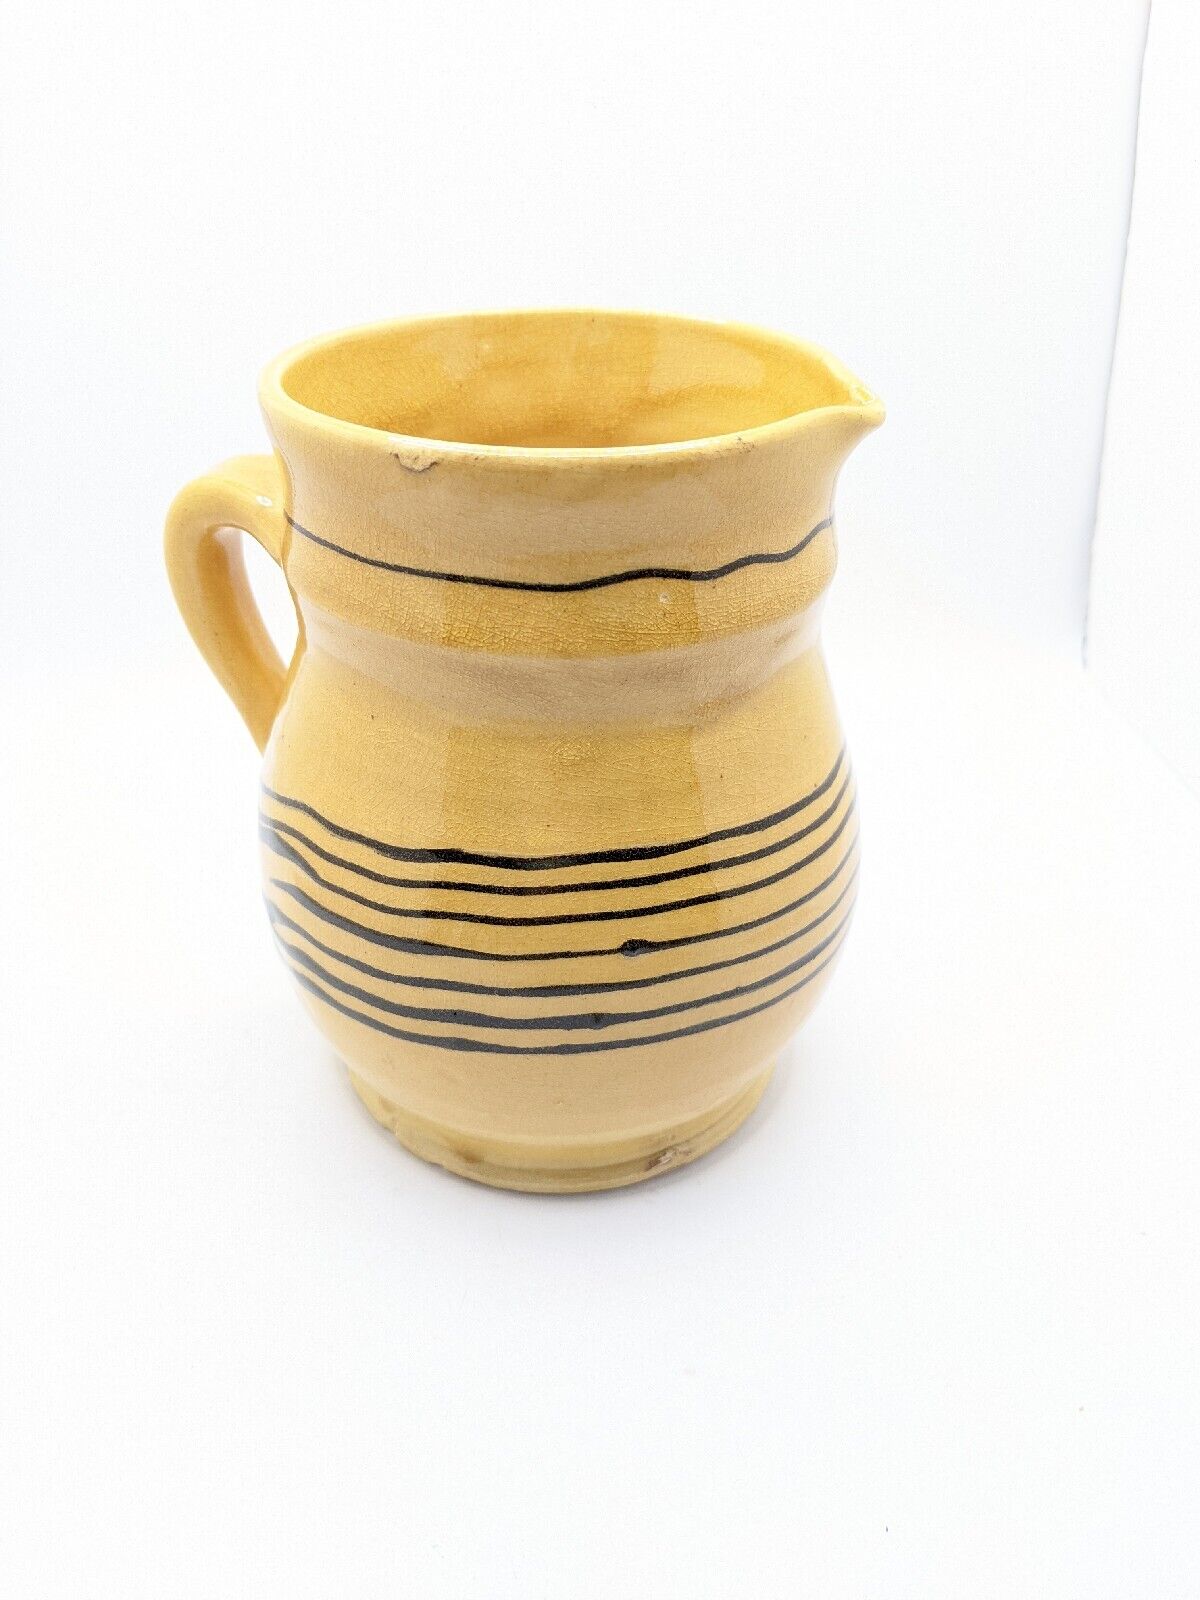 Vintage Old Yellow Ware Pottery Pitcher, Striped Marked